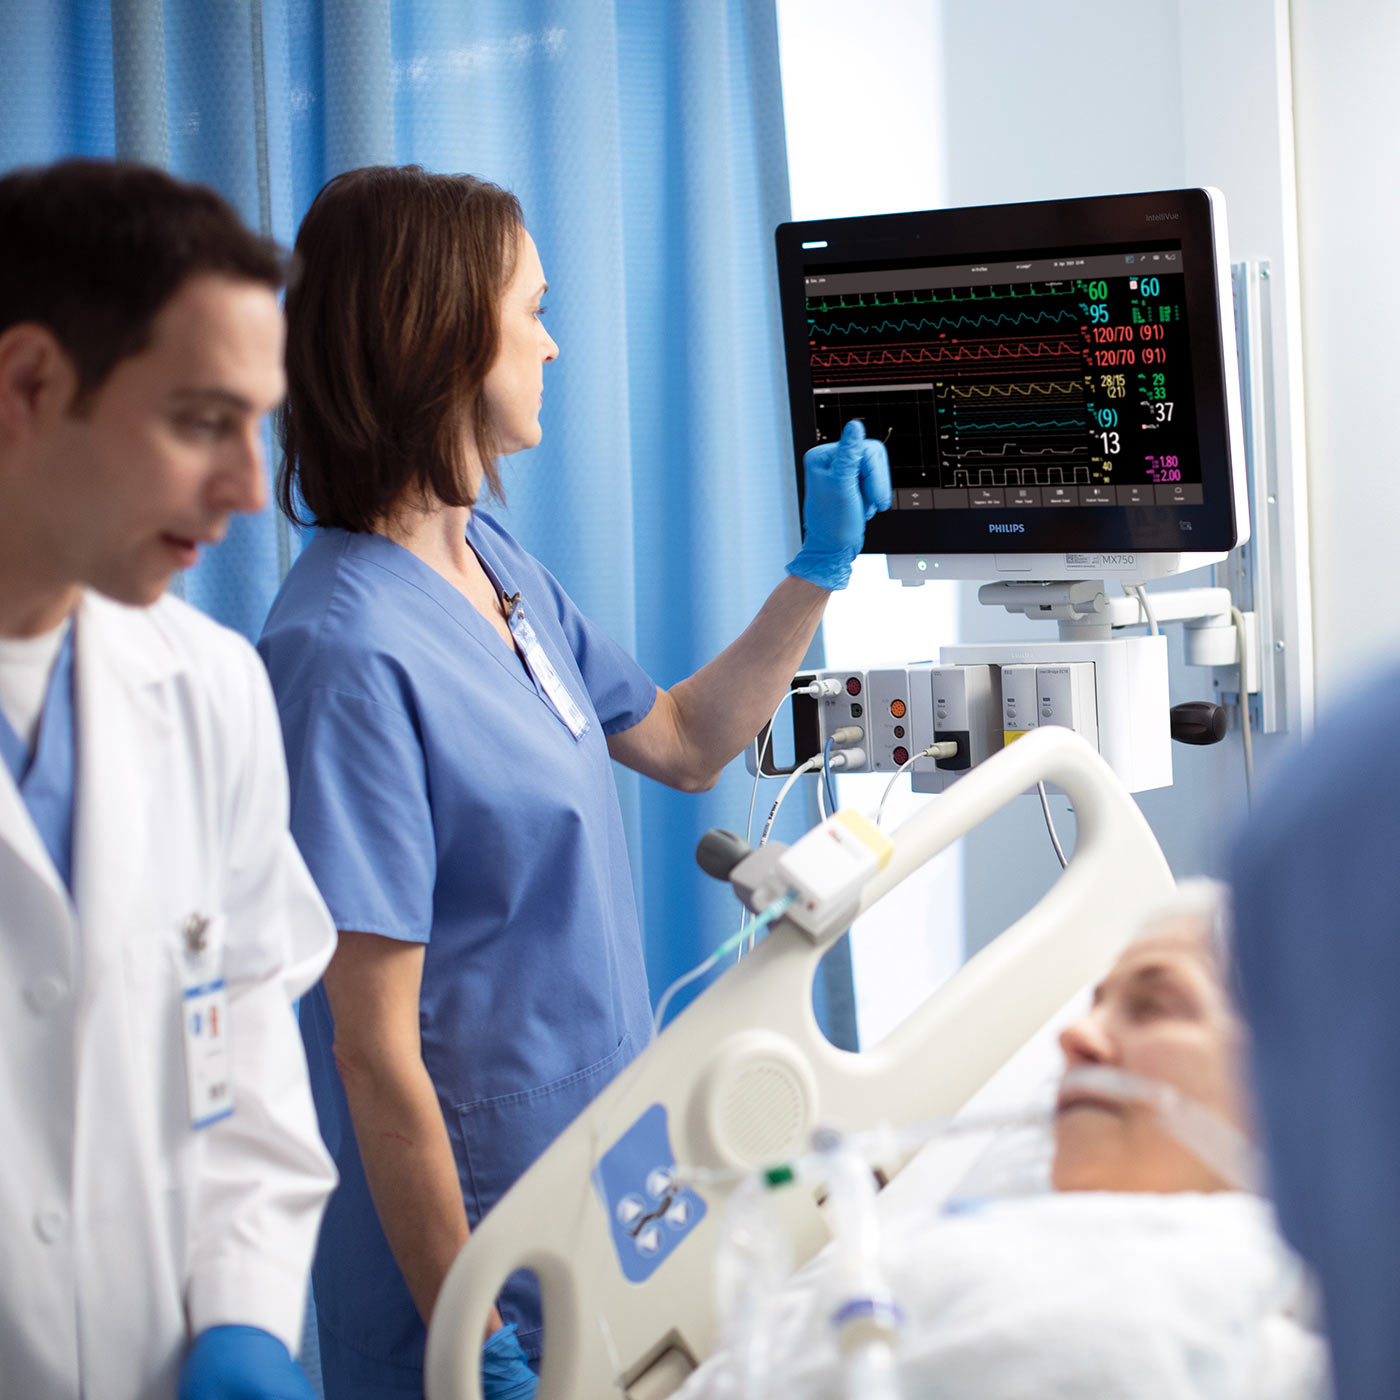 Philips intellivue mx750 patient monitor in the icu